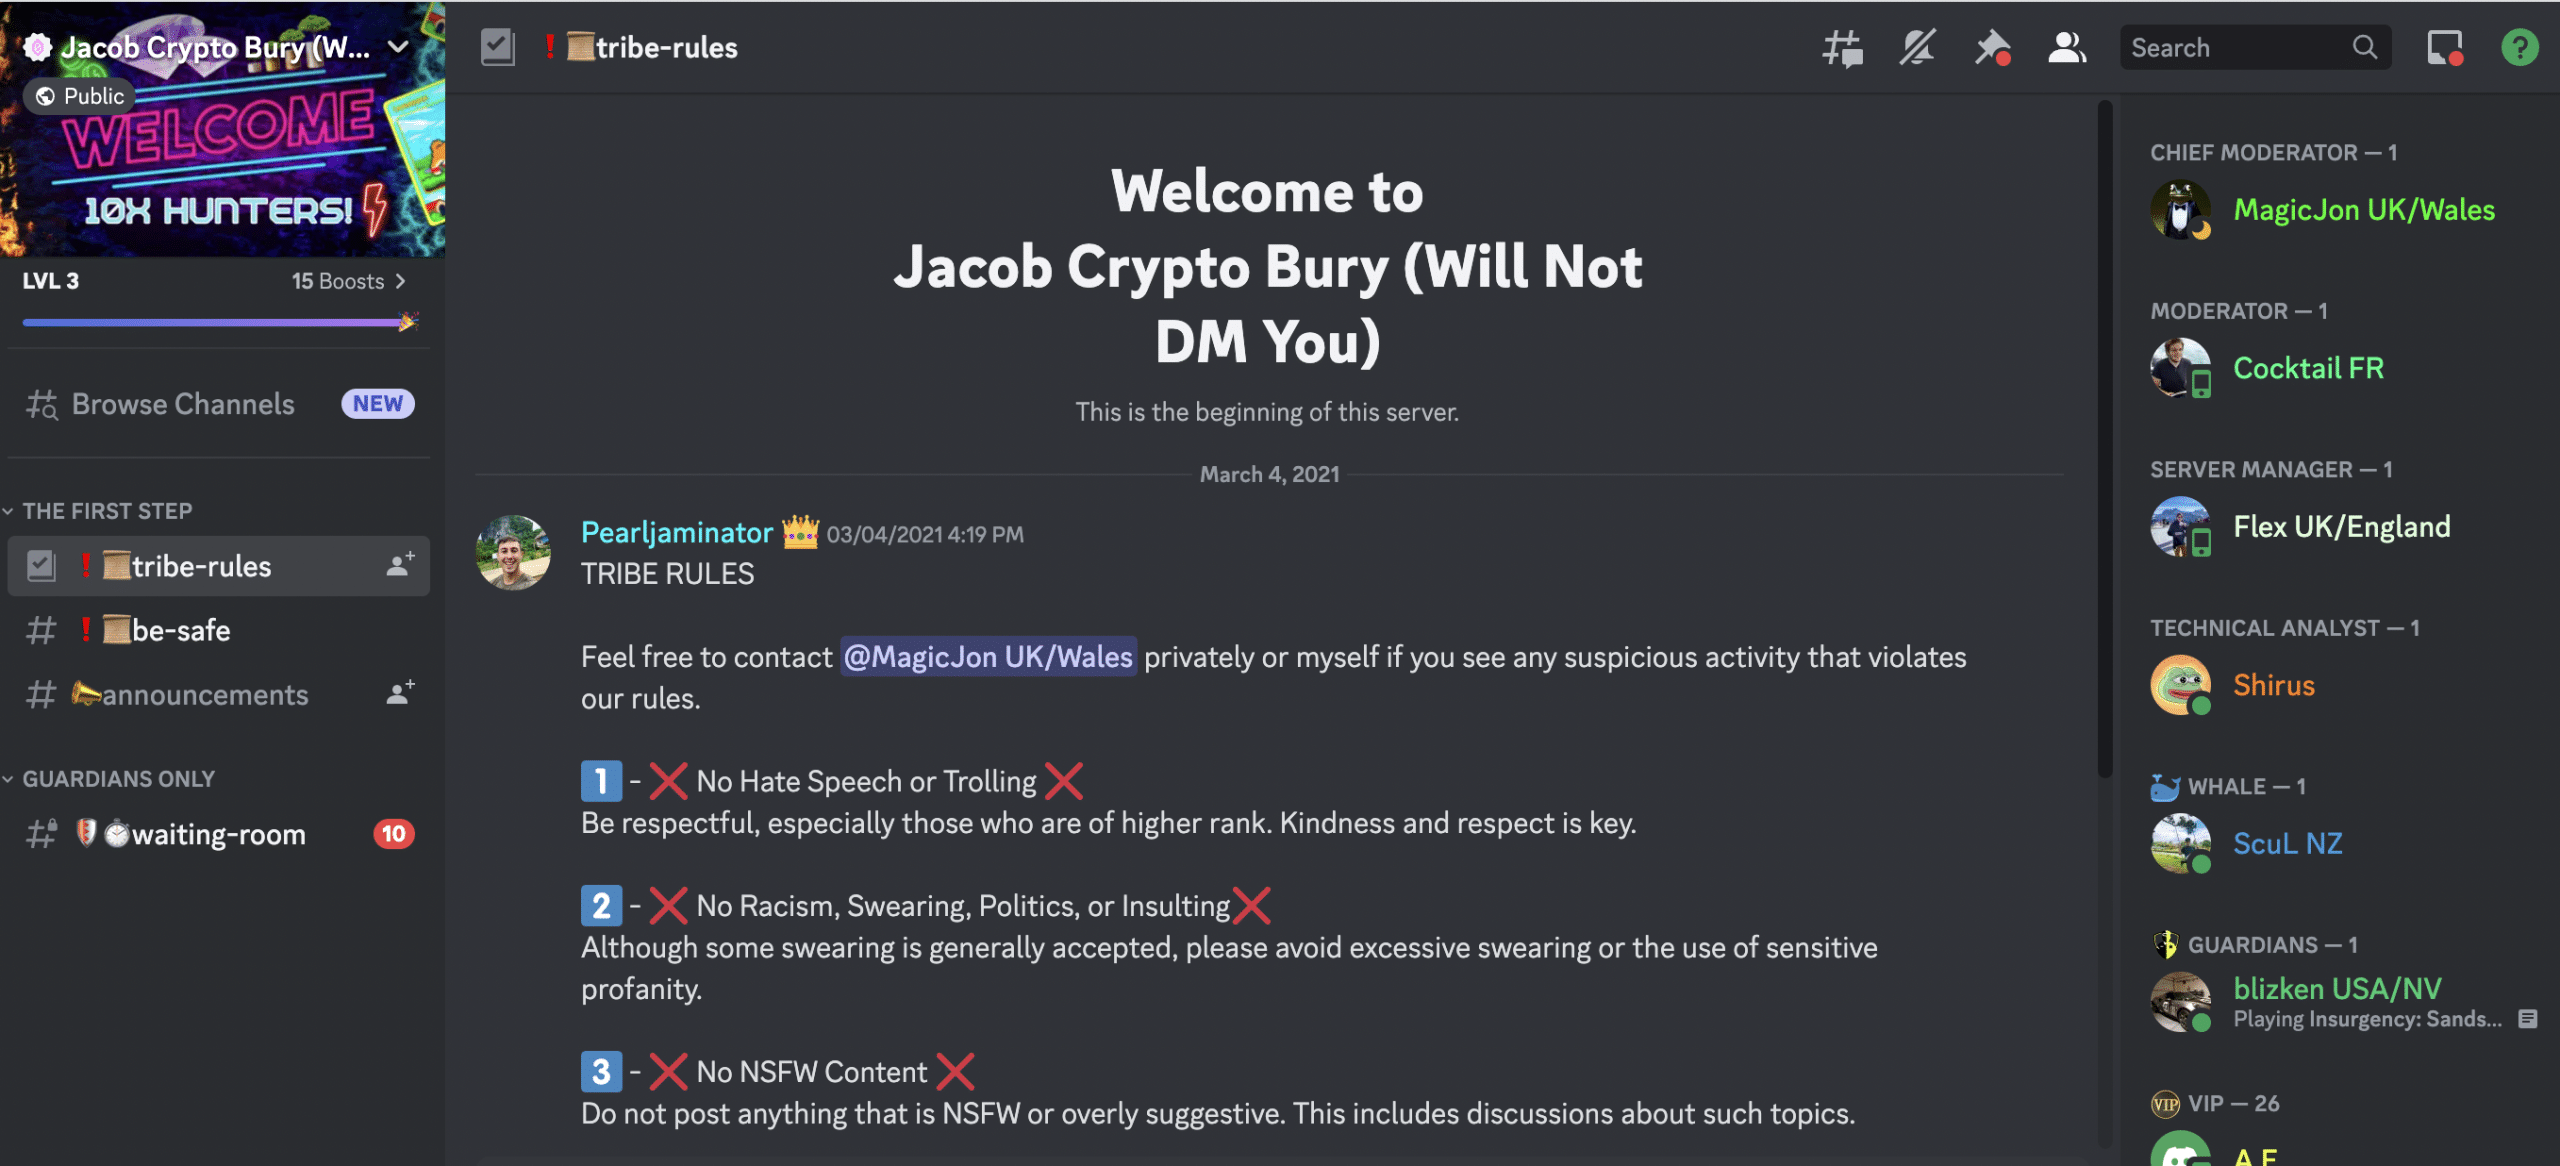 How To Find Your Discord Token. Discord has established itself as